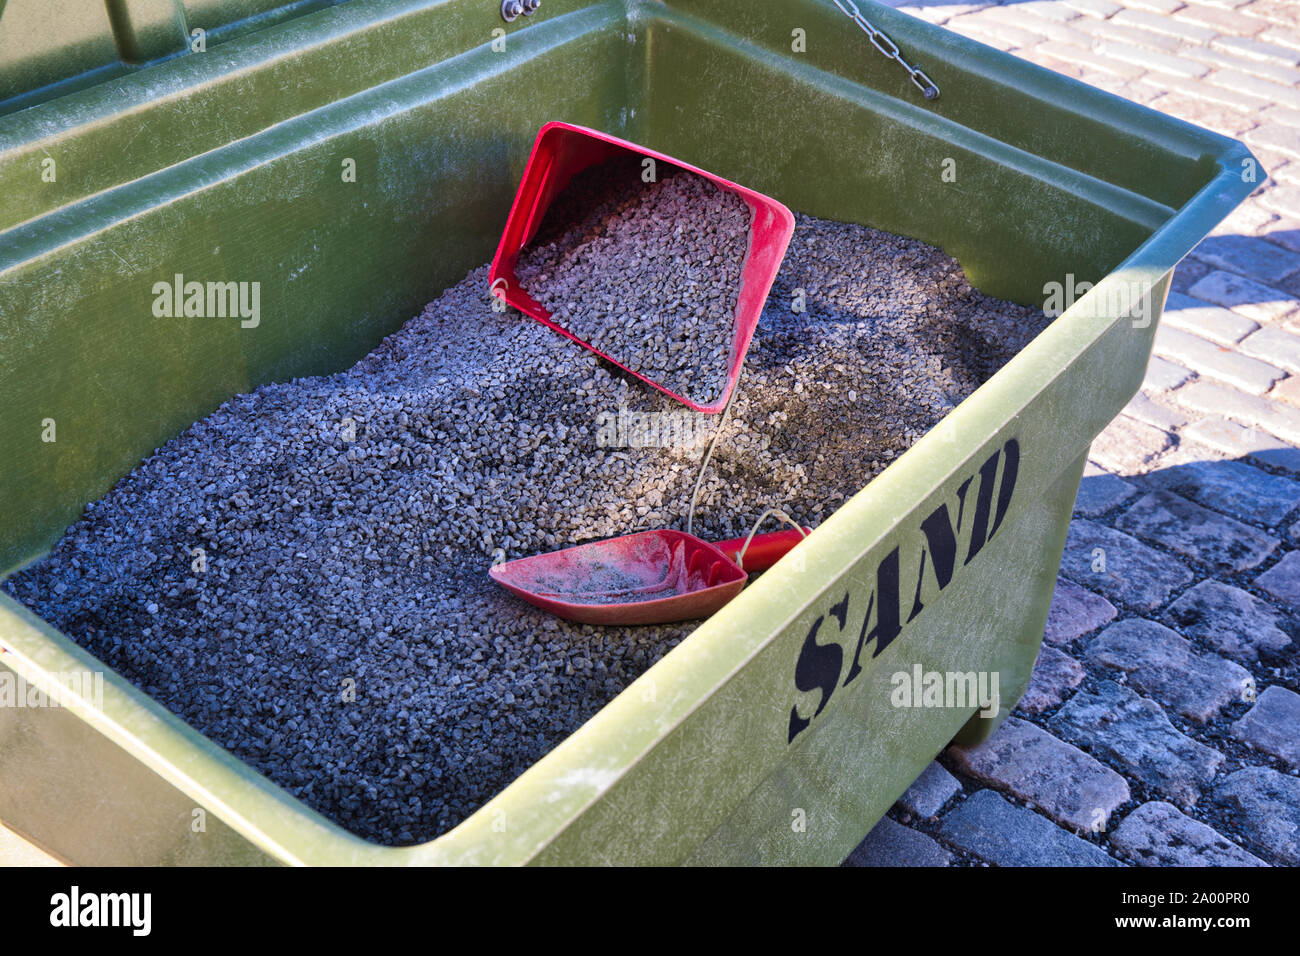 Box of grit and scoops for gritting pavements, Stockholm, sweden Stock Photo